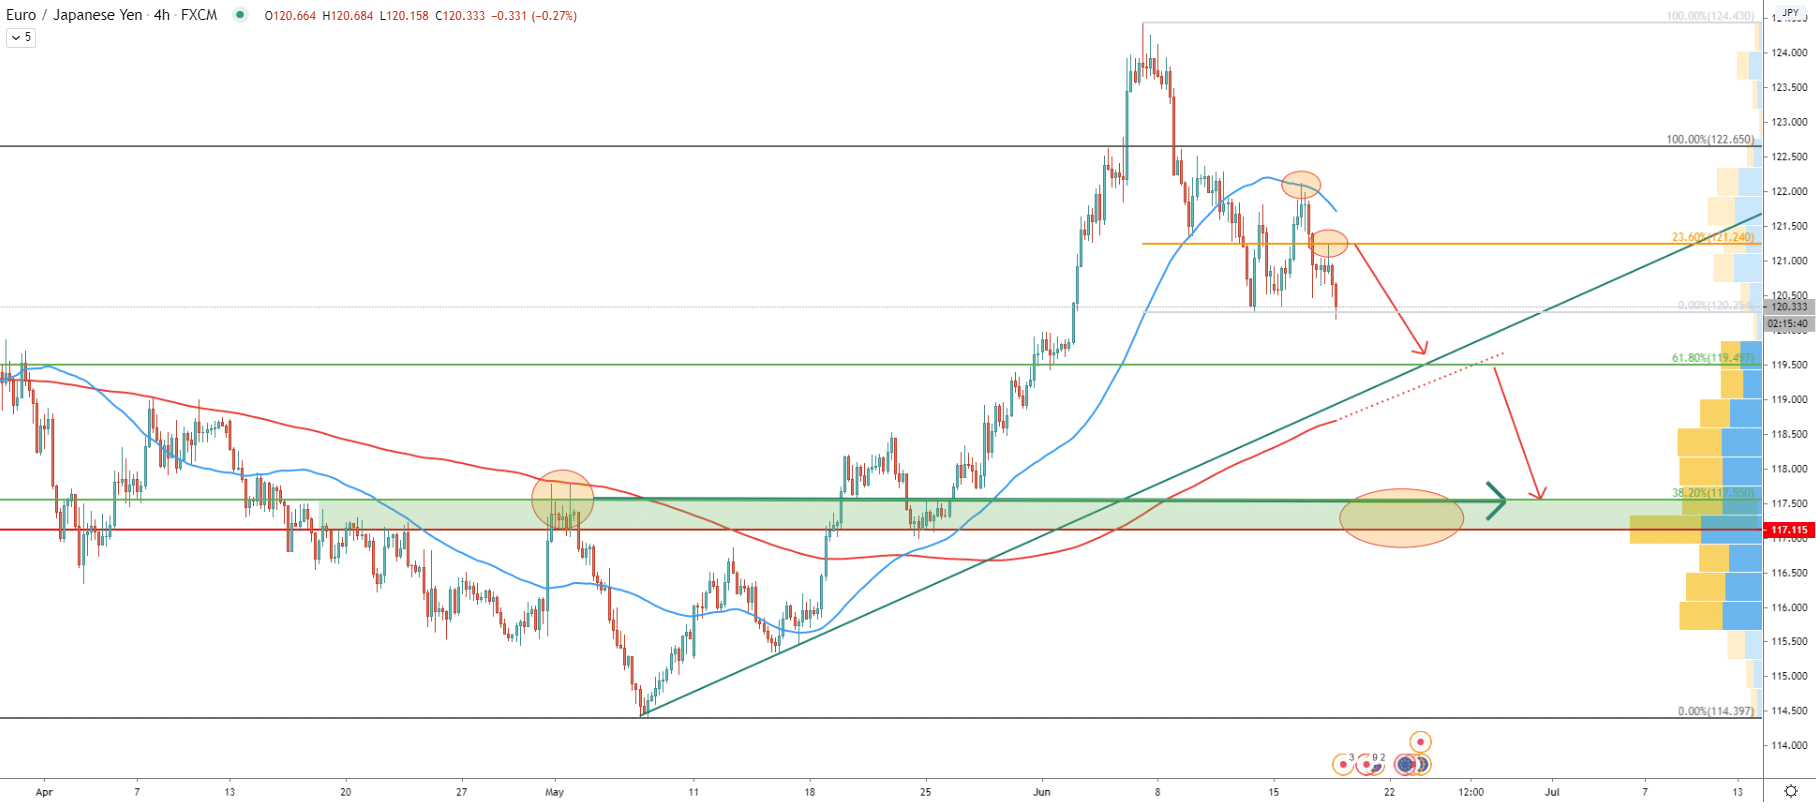 EUR/JPY 4-Hour Technical Analysis 17 June 2020